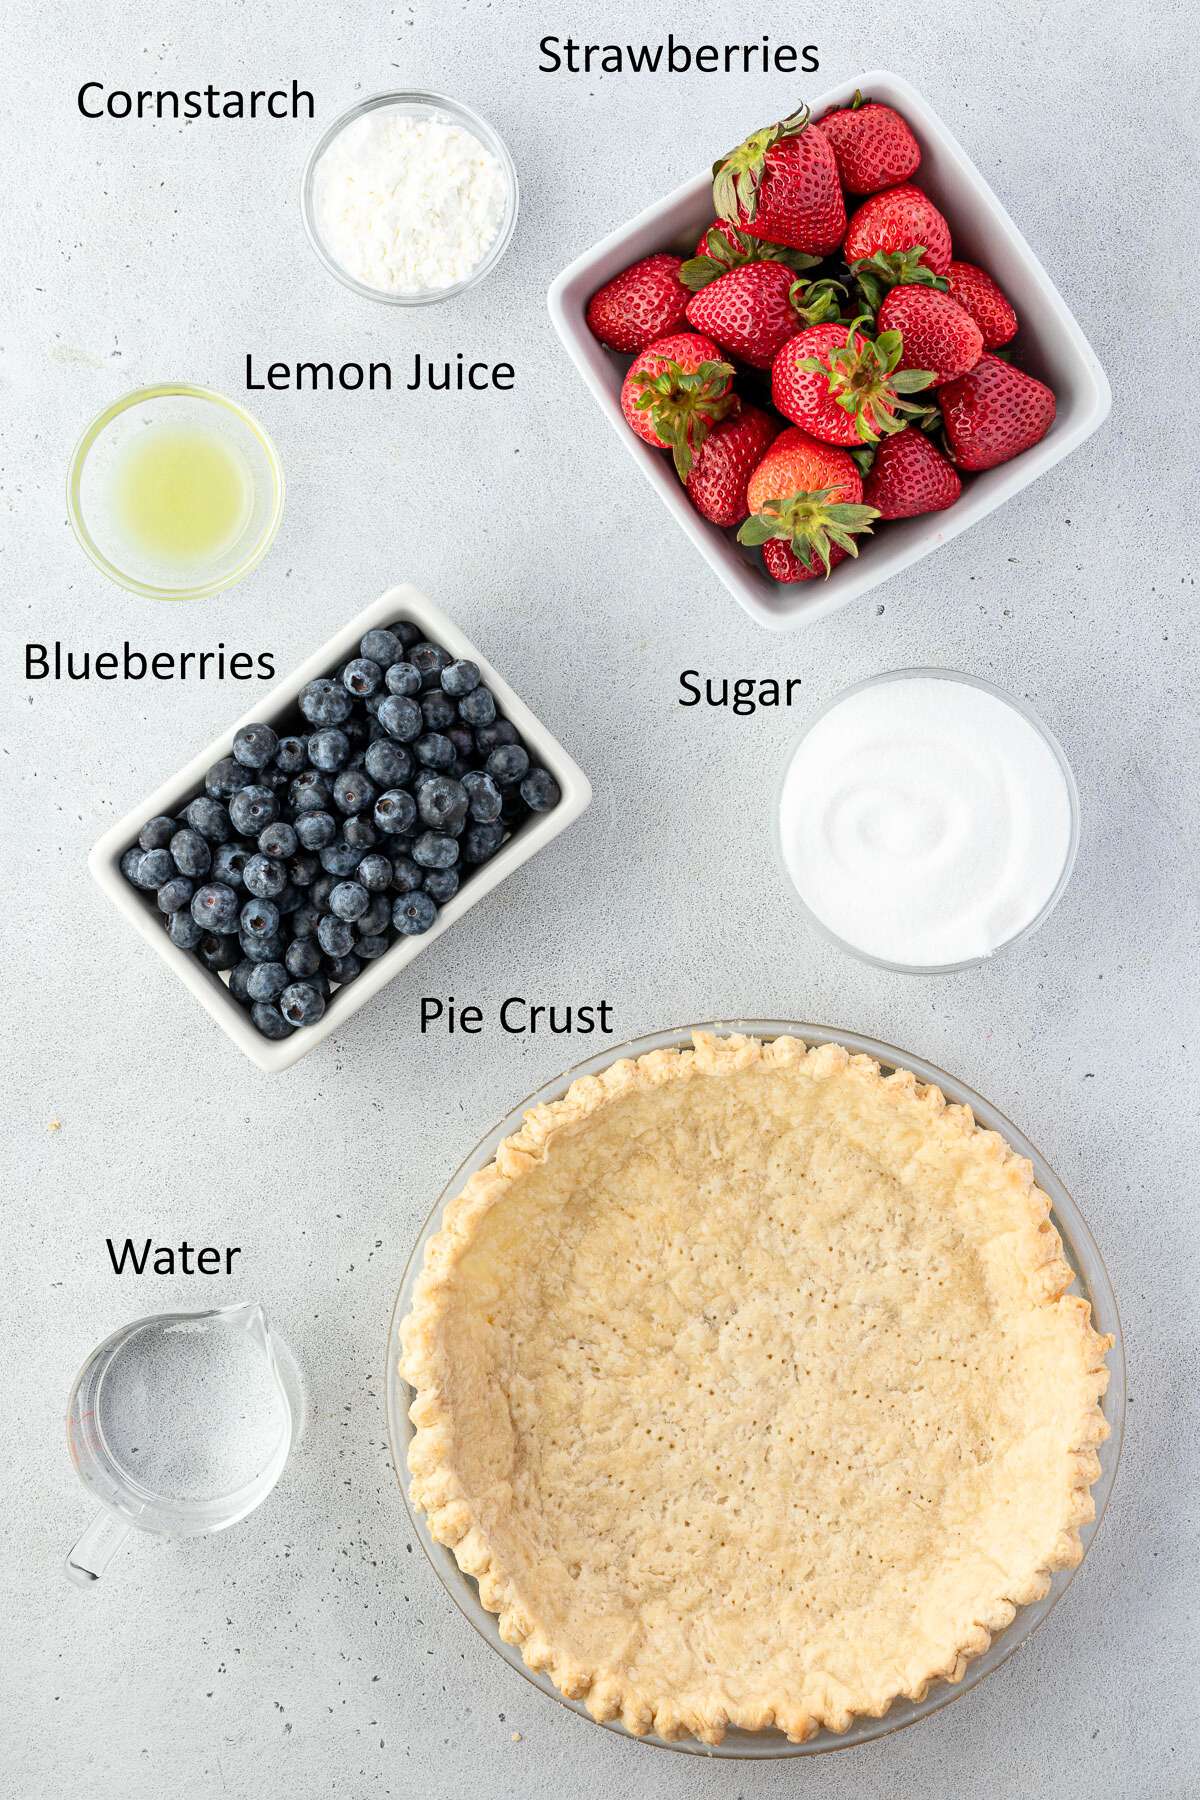 Top-down view of ingredients for making a pie, including strawberries, blueberries, cornstarch, lemon juice, sugar, water, and a pre-made pie crust, all neatly labeled on a white surface.